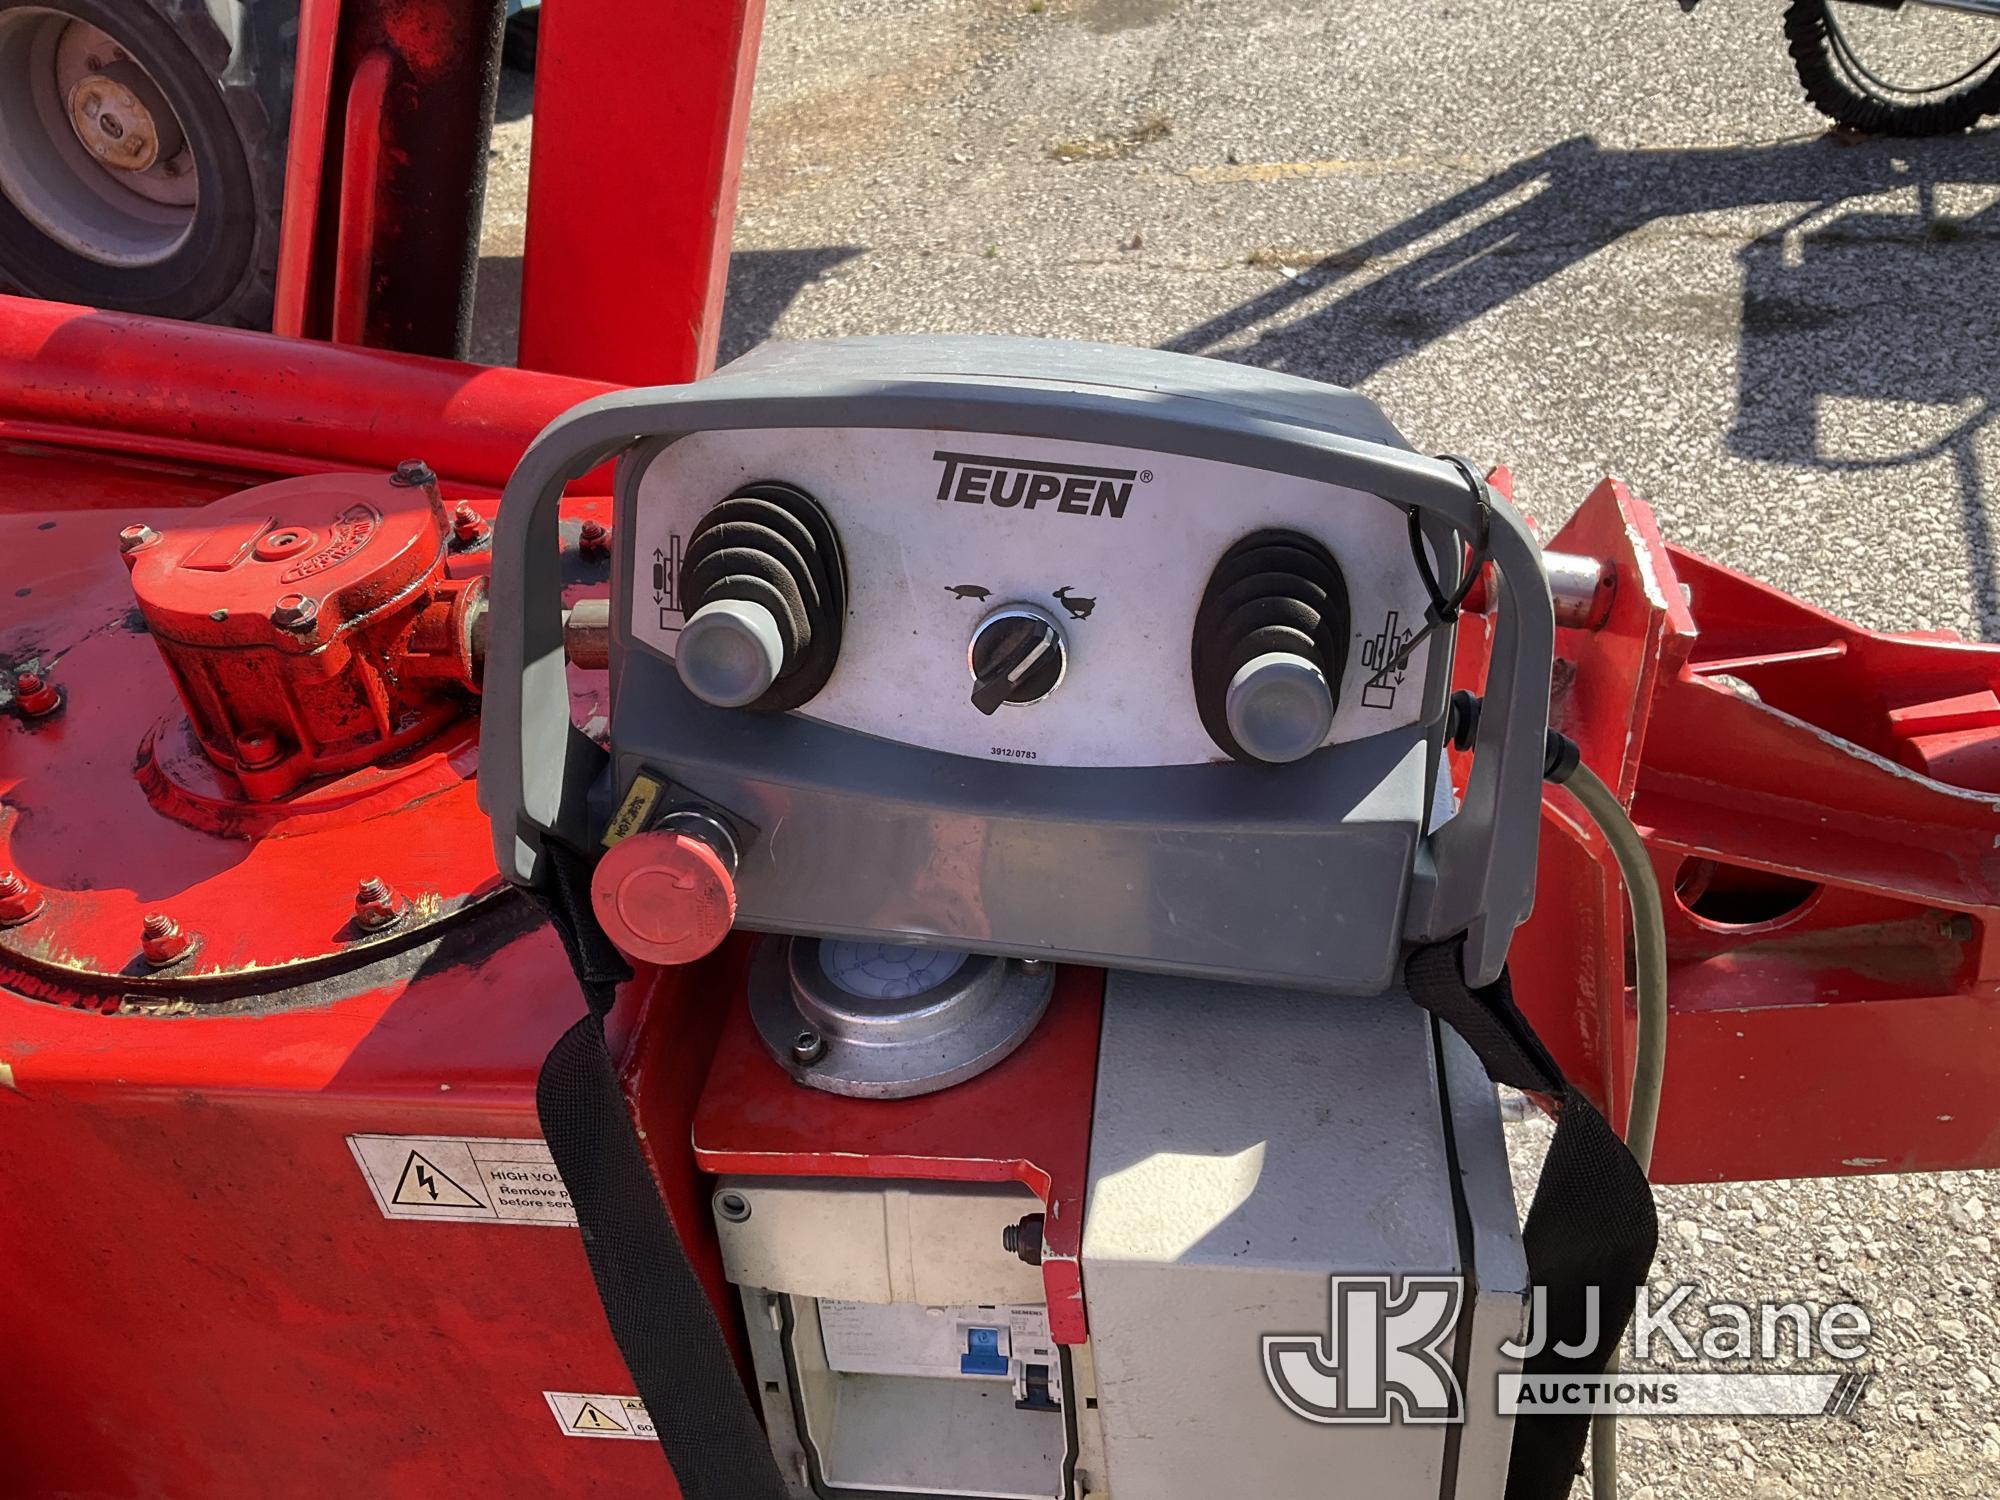 (Kansas City, MO) Teupen Hylift Leo 23 GT Runs, Moves, Upper Unit Has Electrical Issue